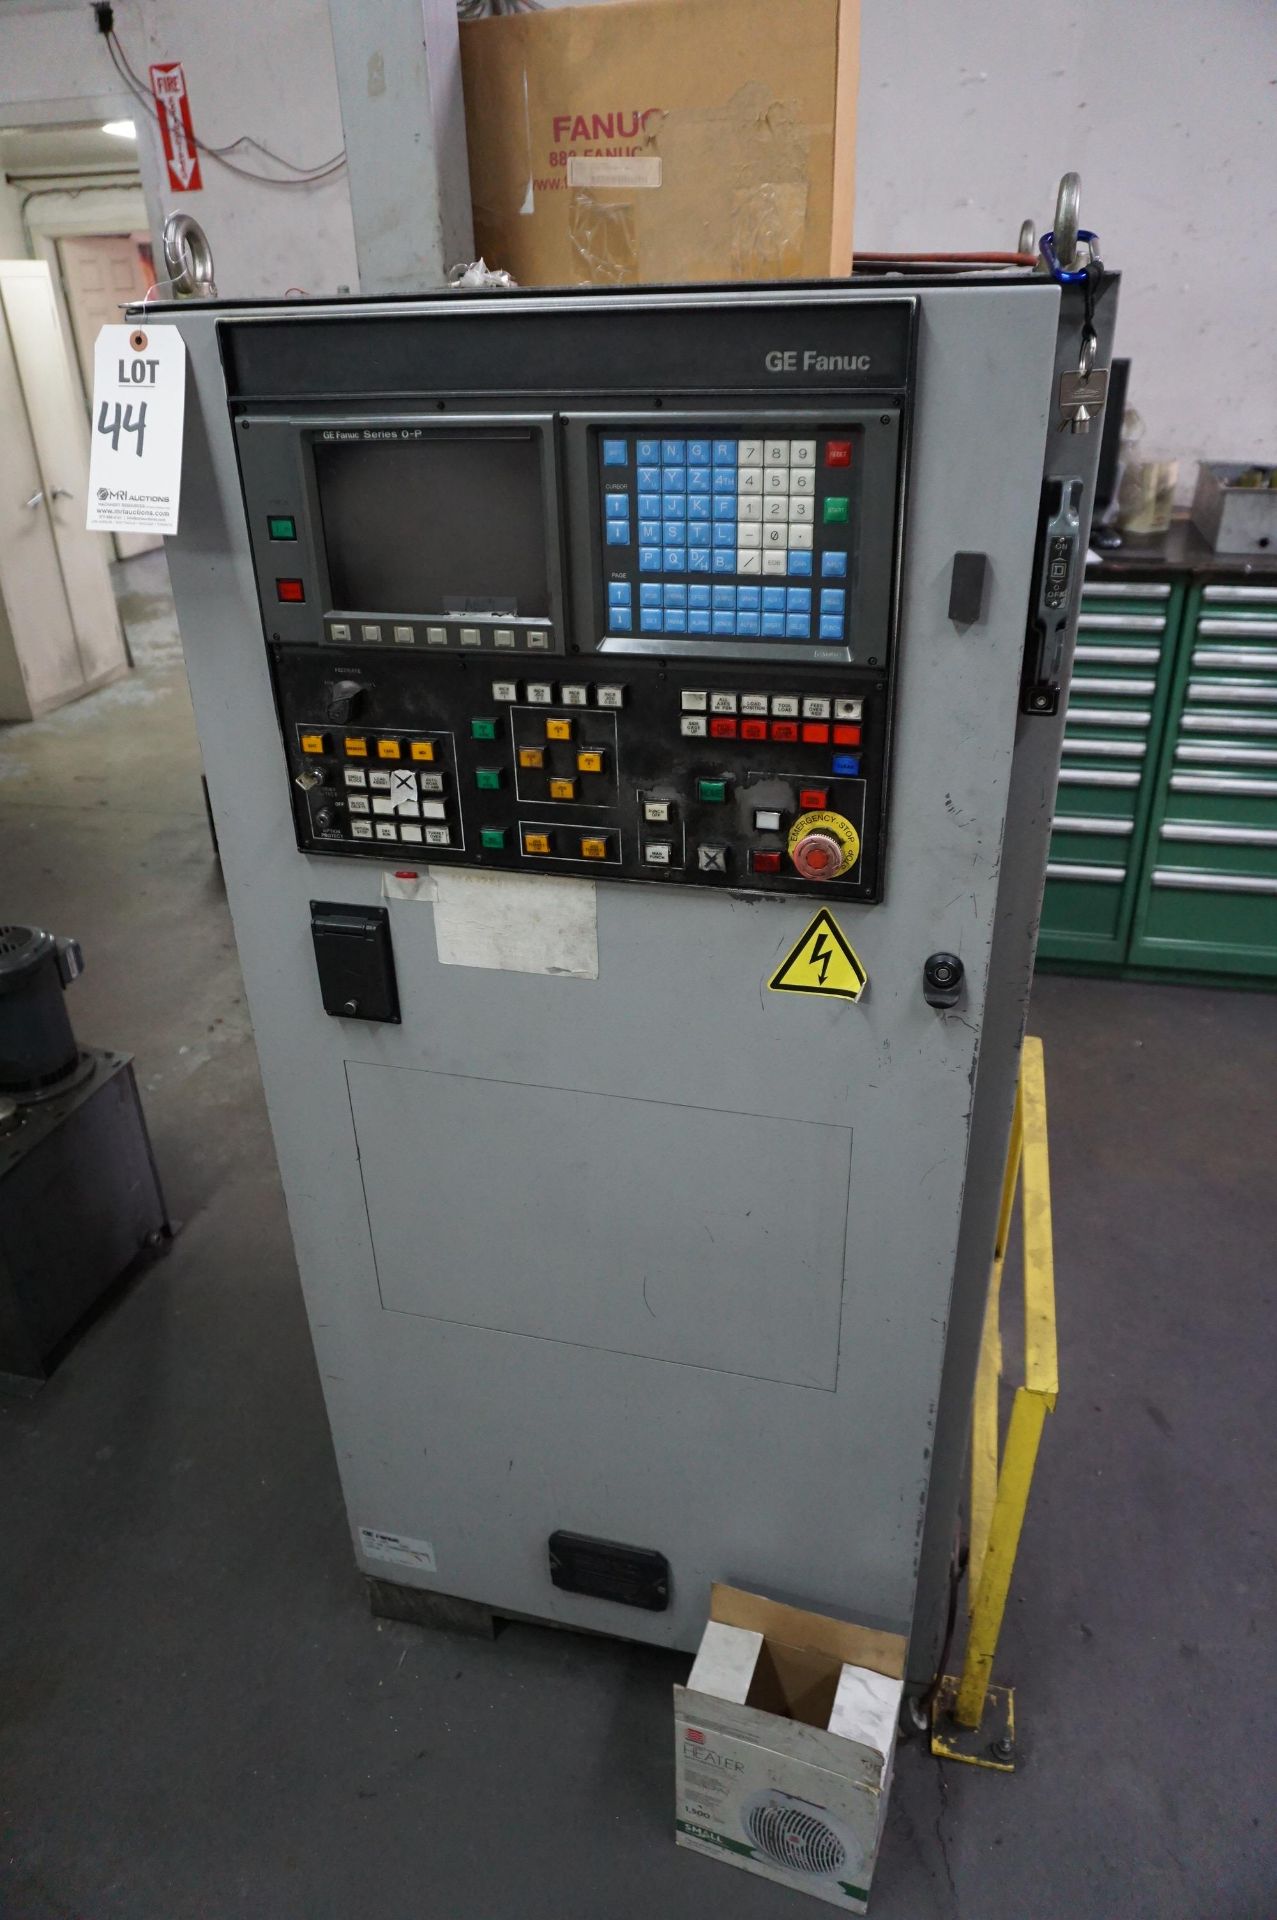 STRIPPIT LVD 1000XP/20 TURRET PUNCH, CATALOG 0124771034, S/N 209091800, 20.5 TON PUNCH CAPACITY, - Image 6 of 18